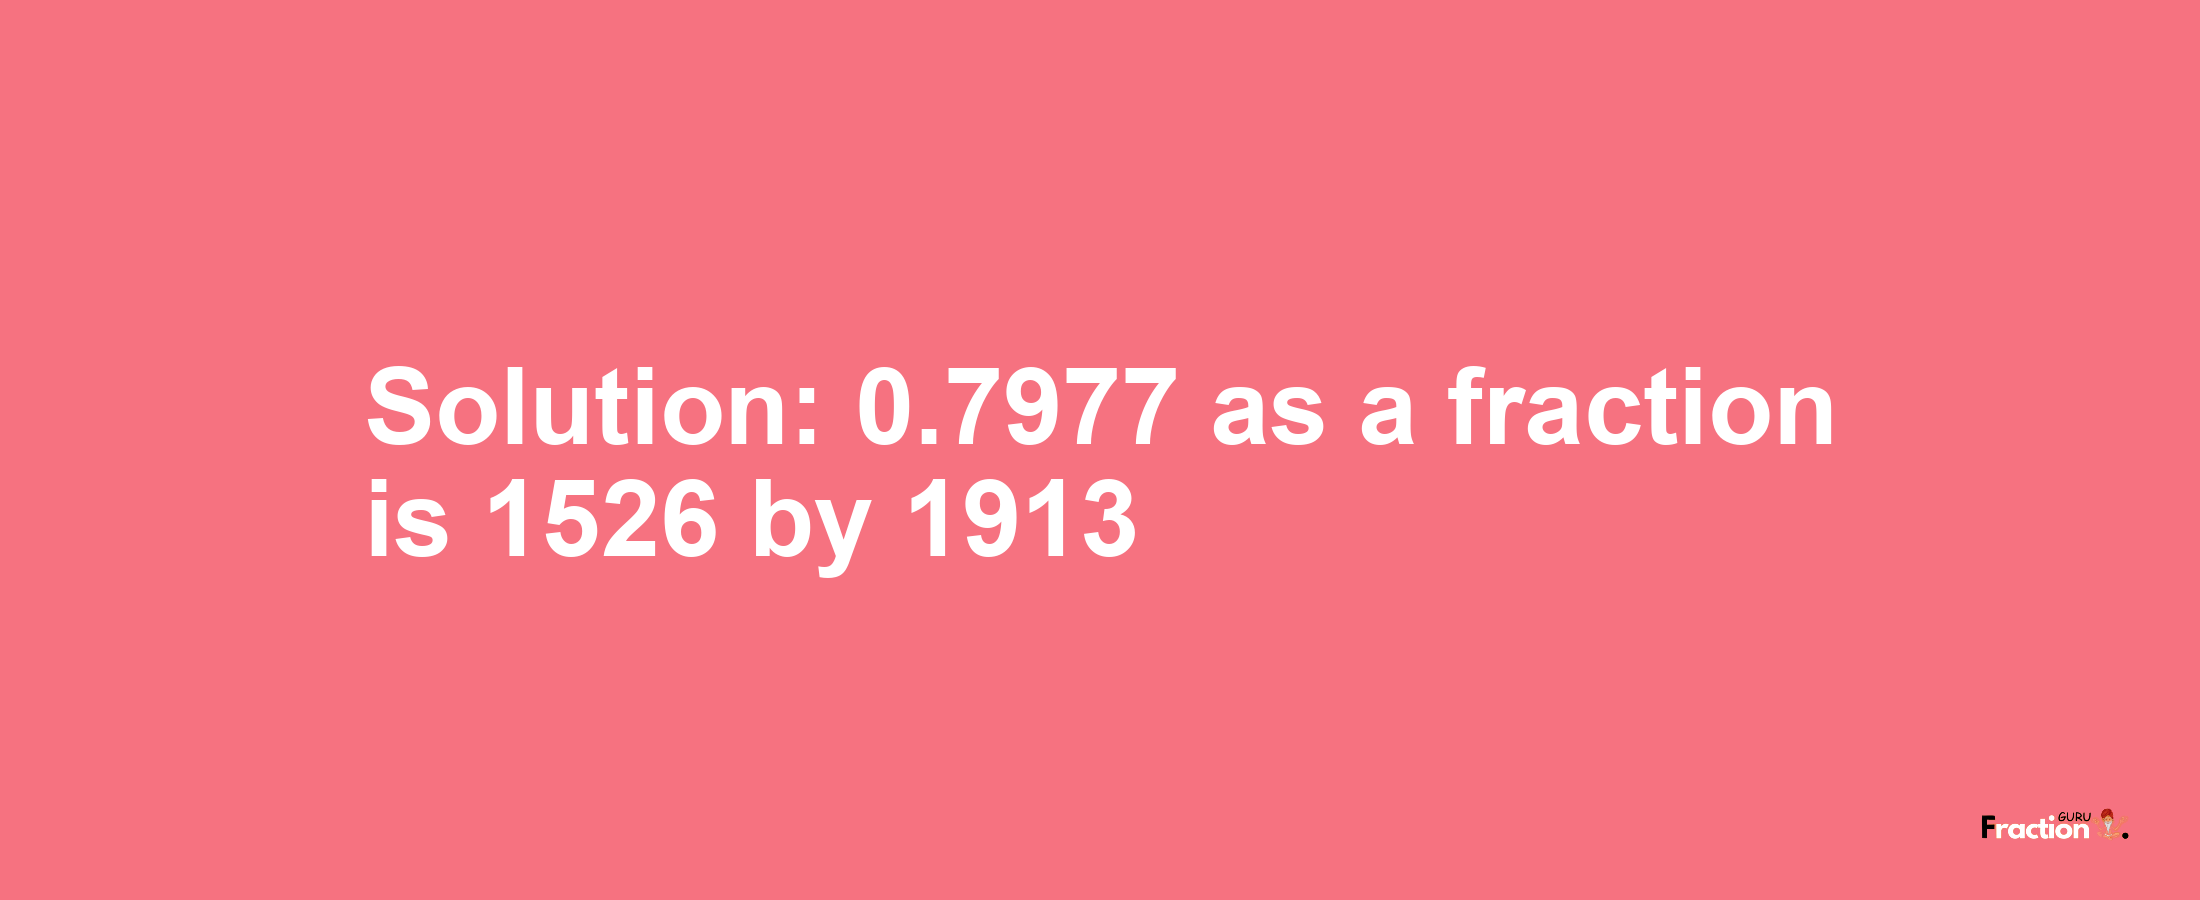 Solution:0.7977 as a fraction is 1526/1913